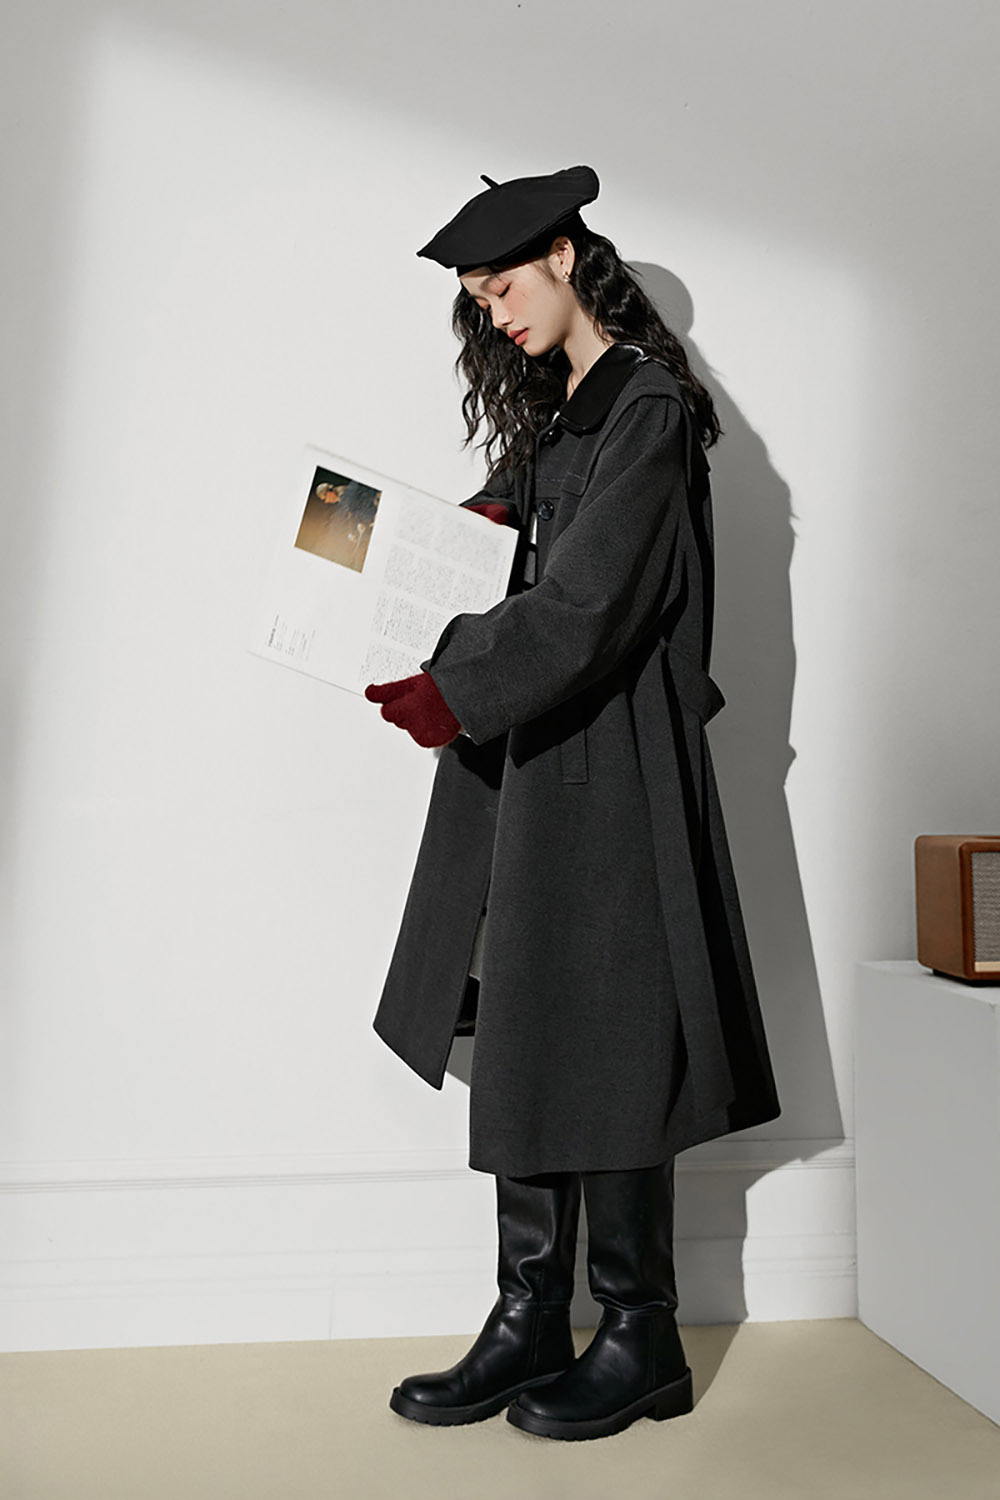 KUOSE Medium to Large size of woolen overcoat for women in autumn and winter 2022 new style black lapel loose woolen coat